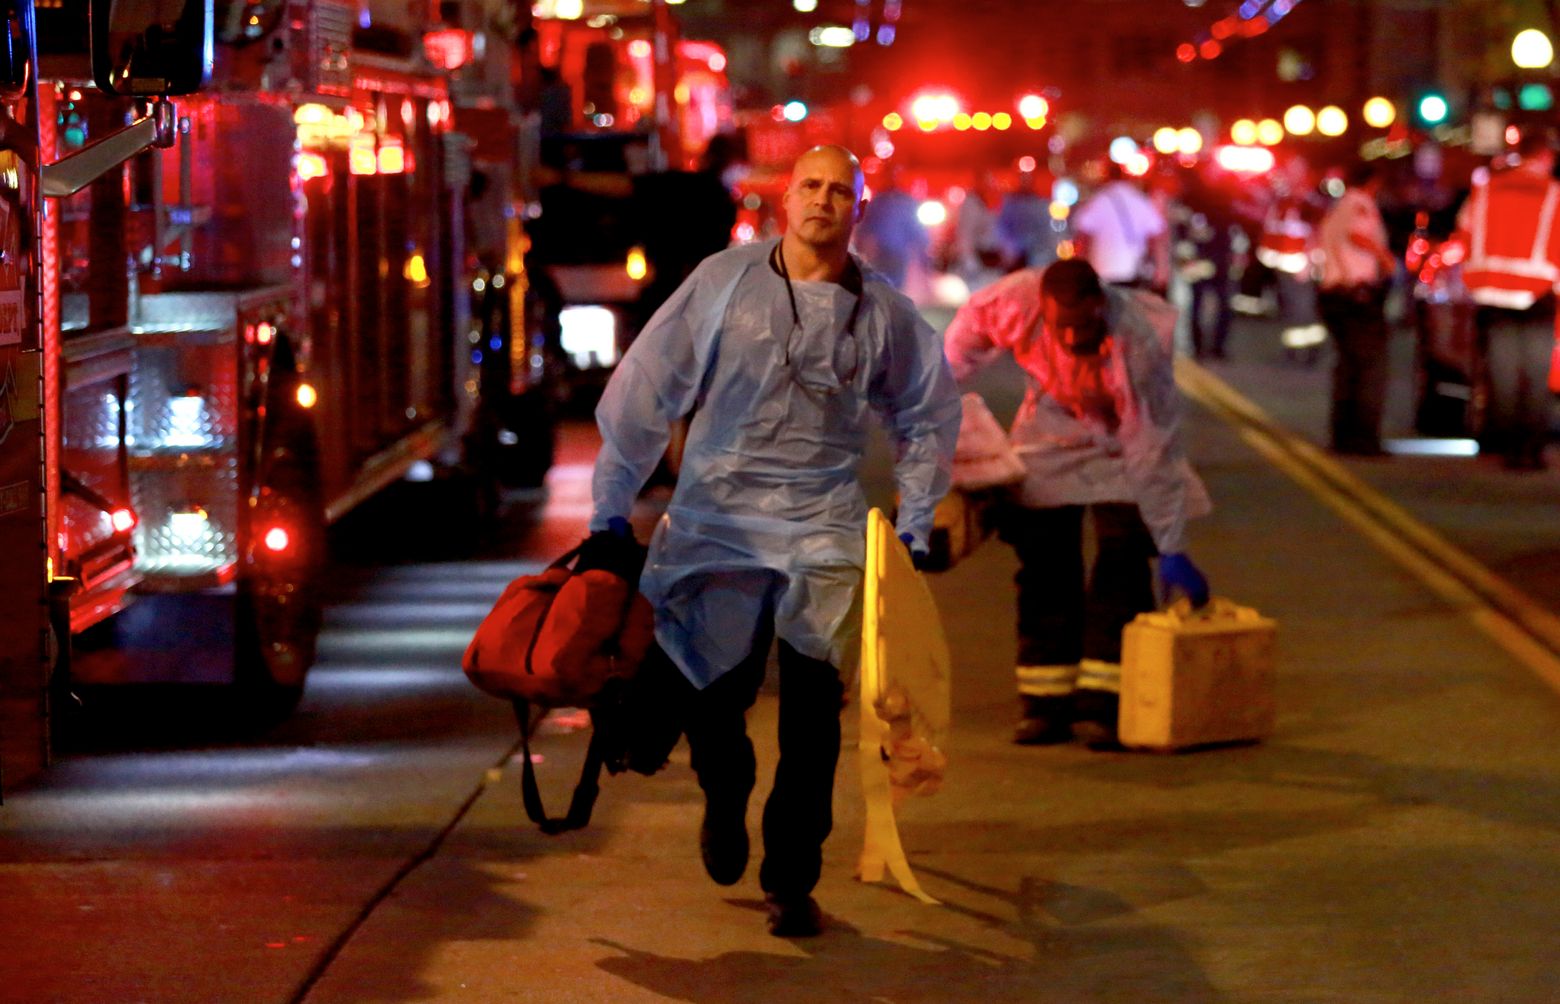 5 people shot in downtown Seattle; search for shooter continues | The Seattle Times